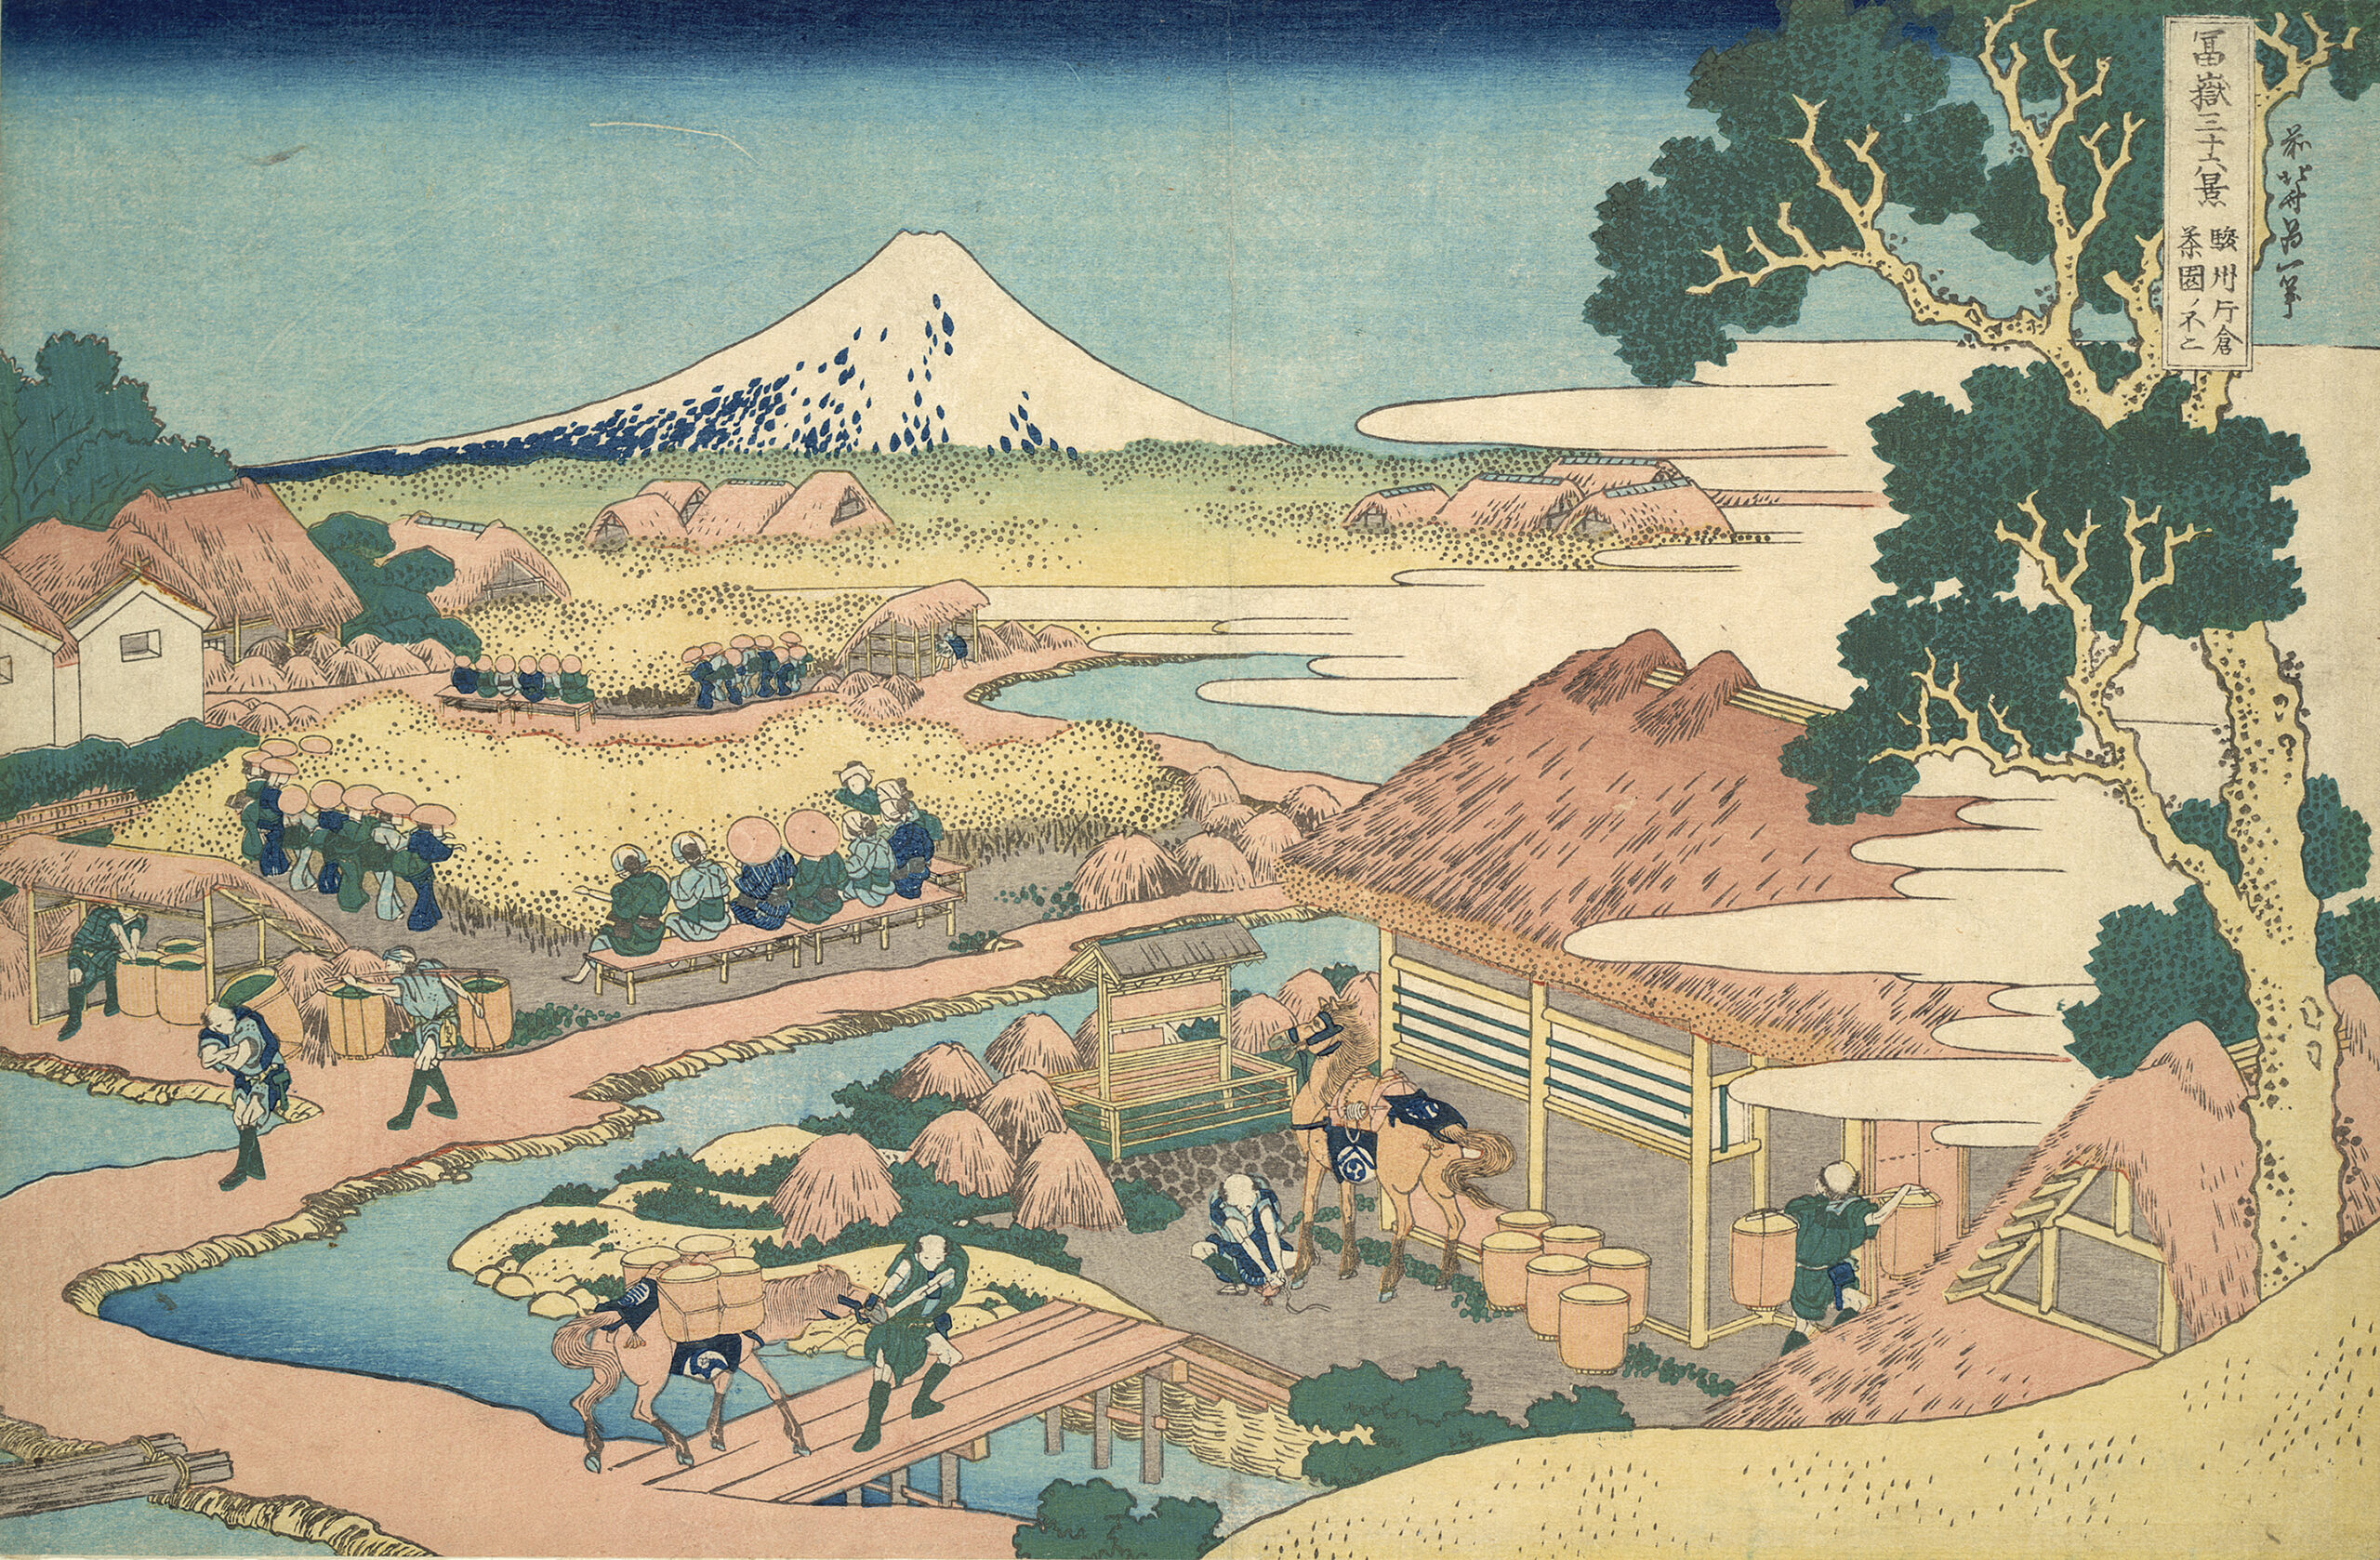 A woodblock print of a Japanese village with Mt. Fuji in the distance